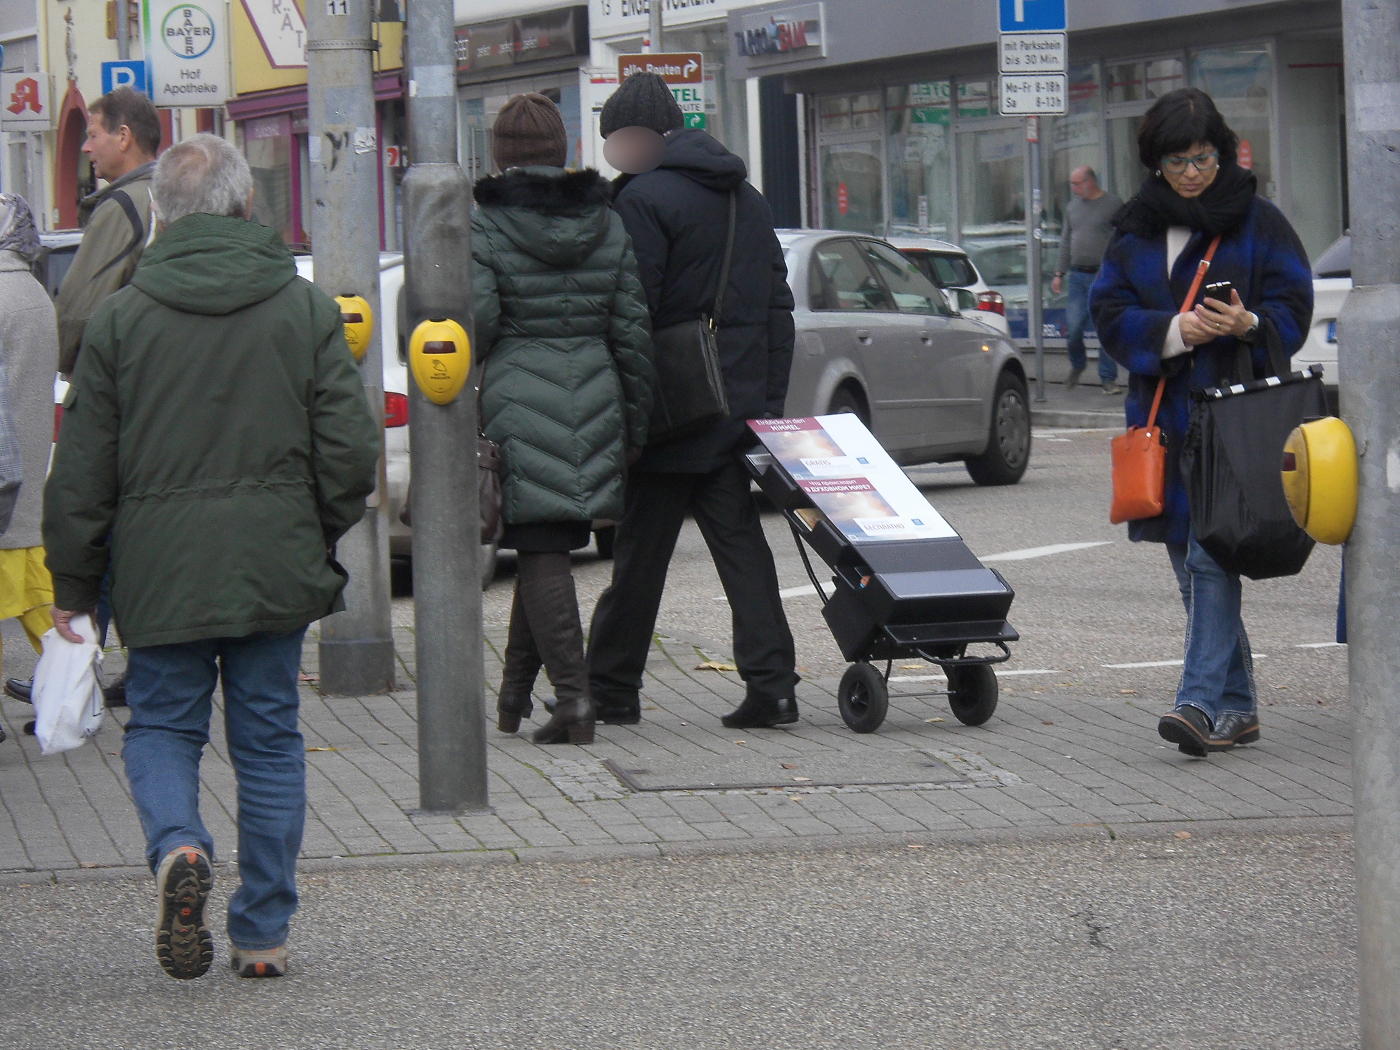 Bruchsal – Enlightenment about the Jehovah's Witnesses – Three Hours of It